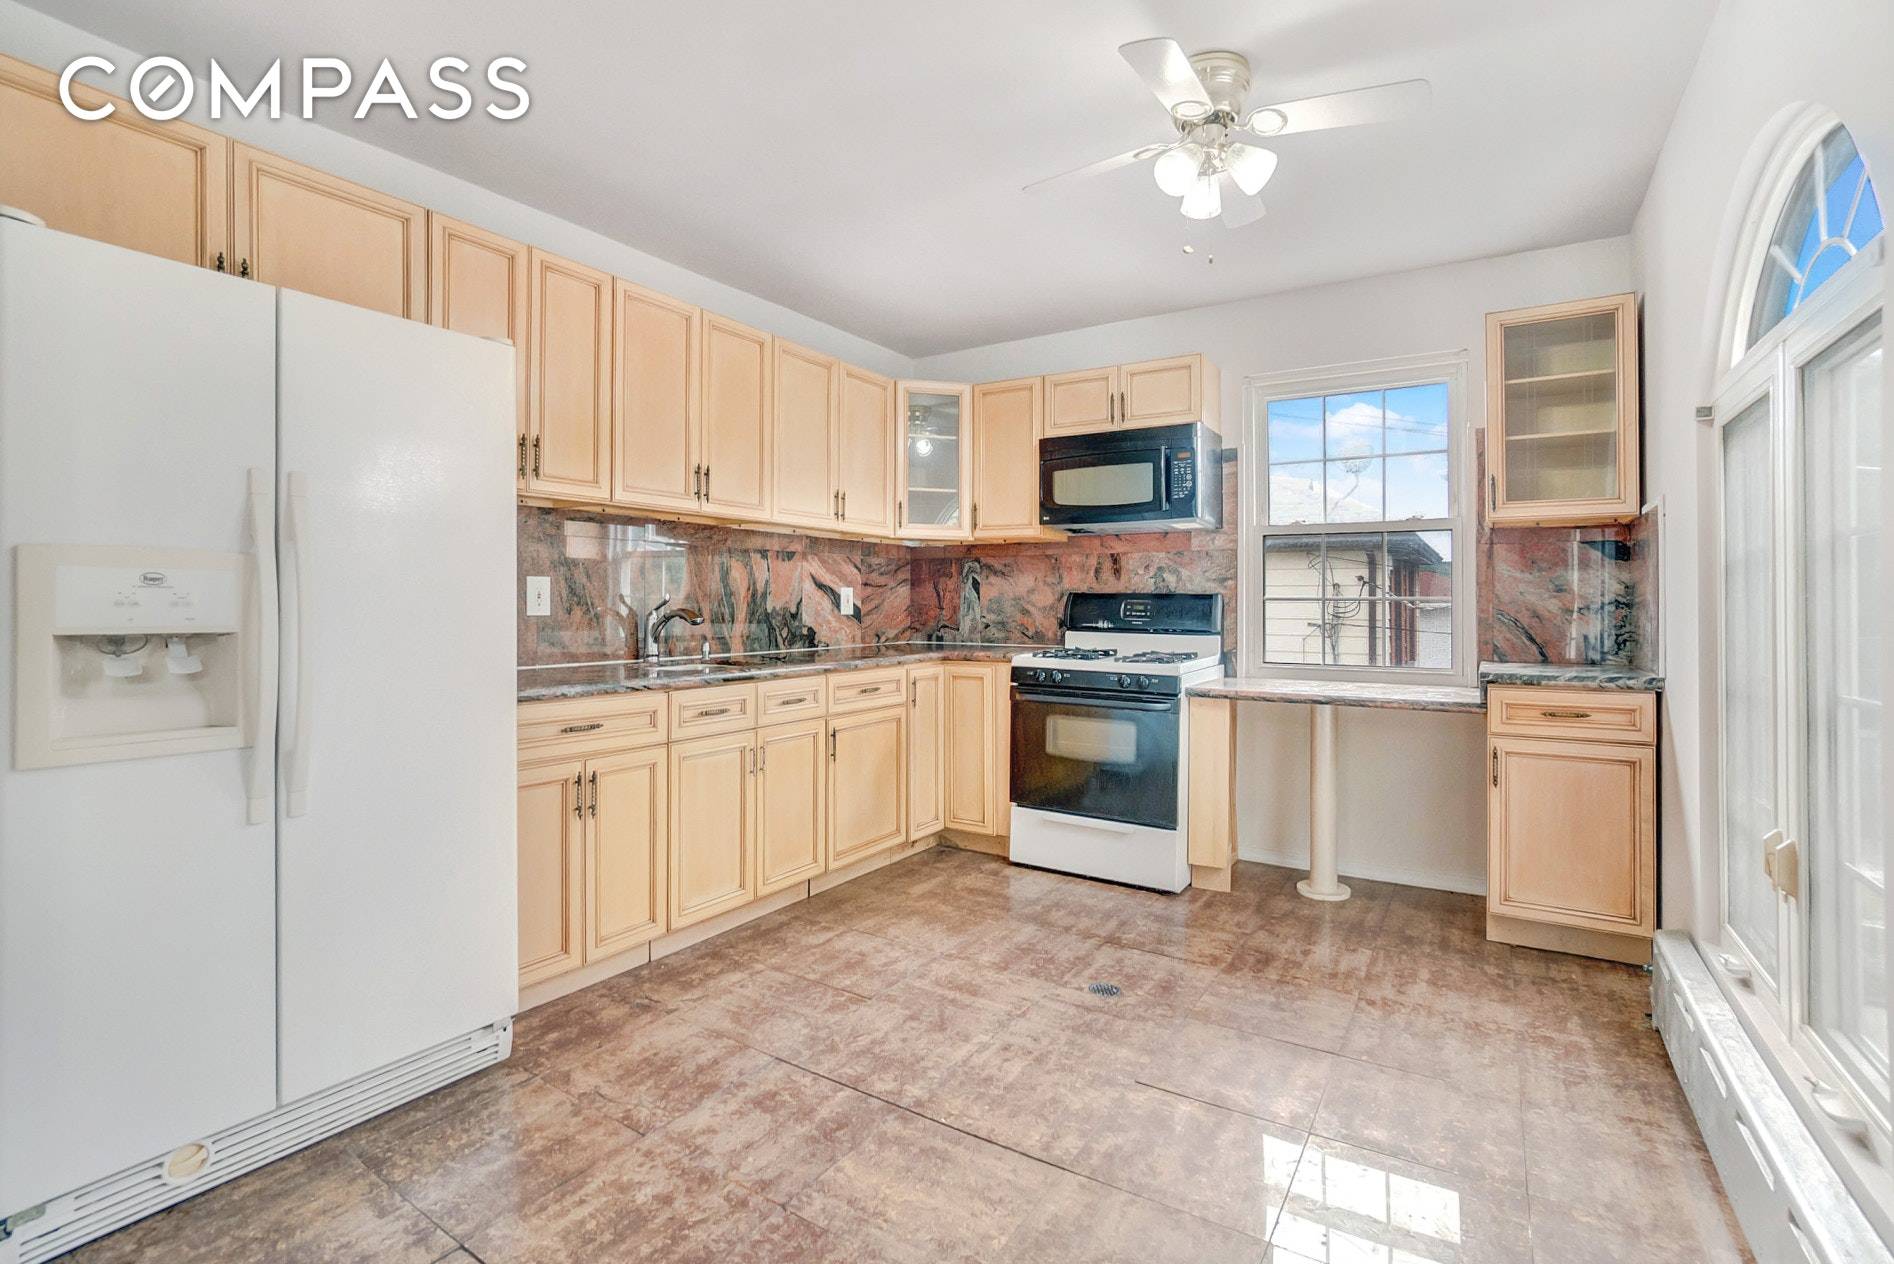 LIVE IN AN INCREDIBLE 4 BED 2 BATH UNIT CLOSE TO CAMPUS.